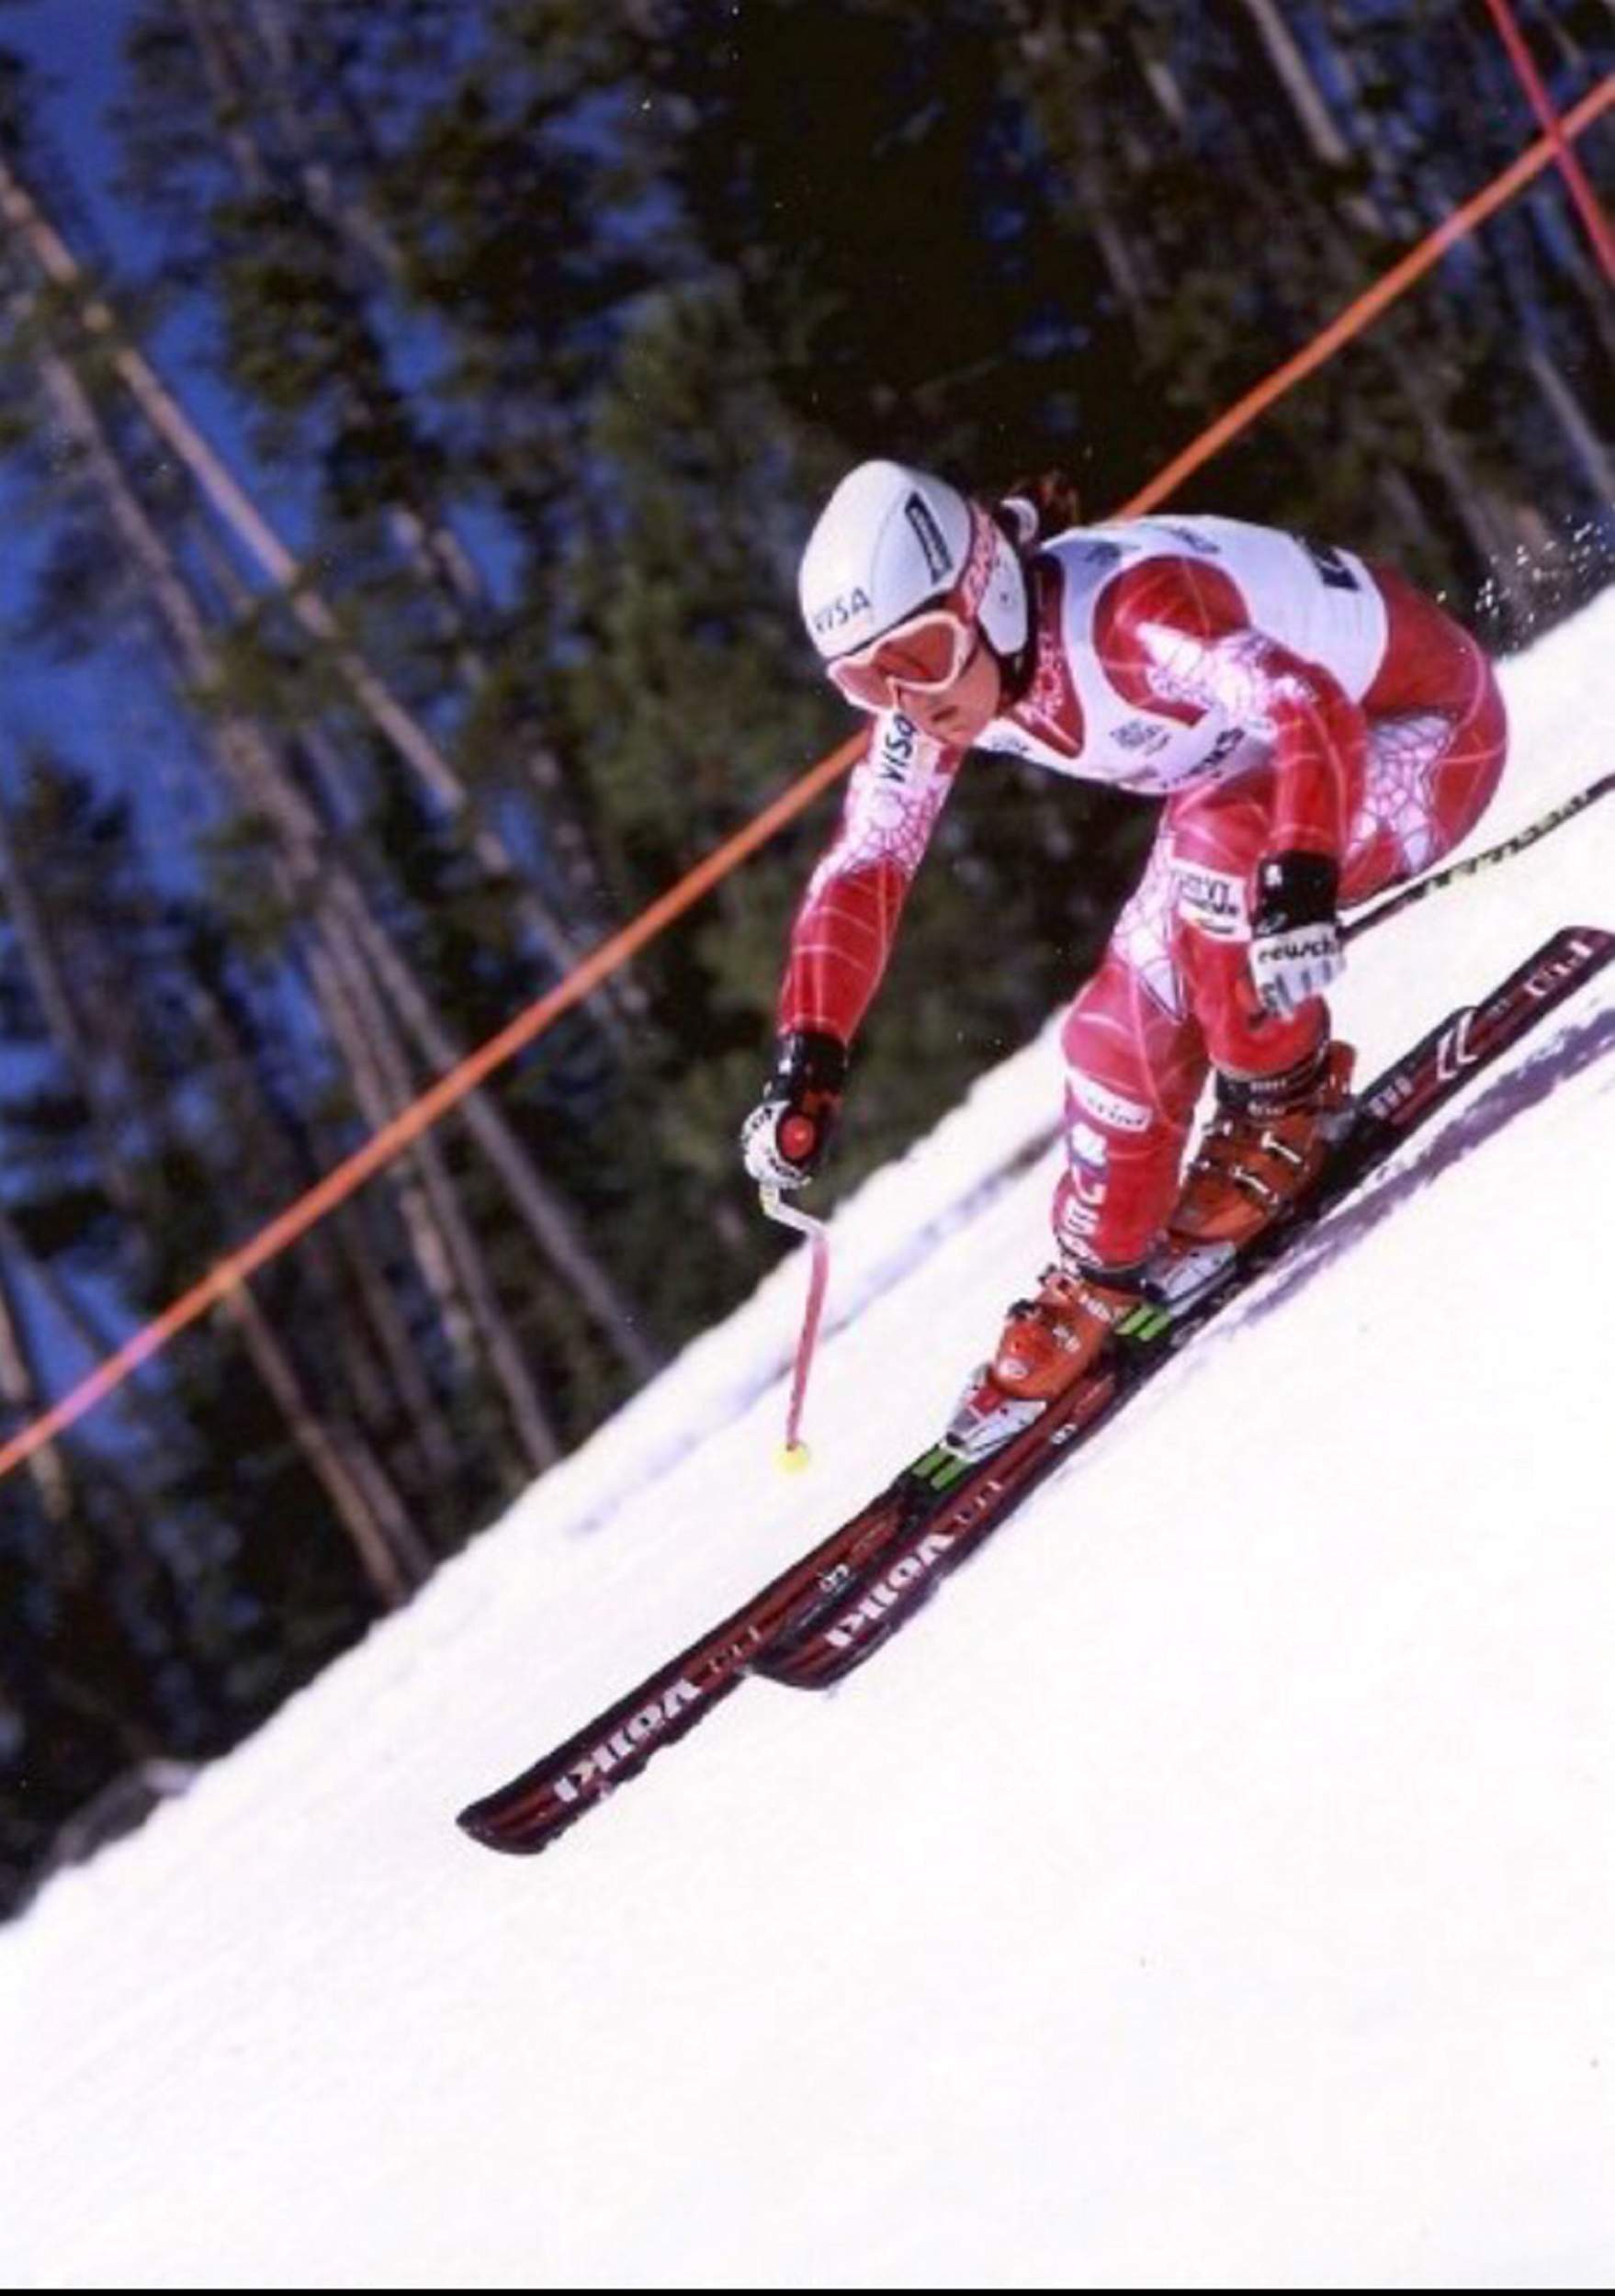 Dove Creek skier inducted into Hall of Fame